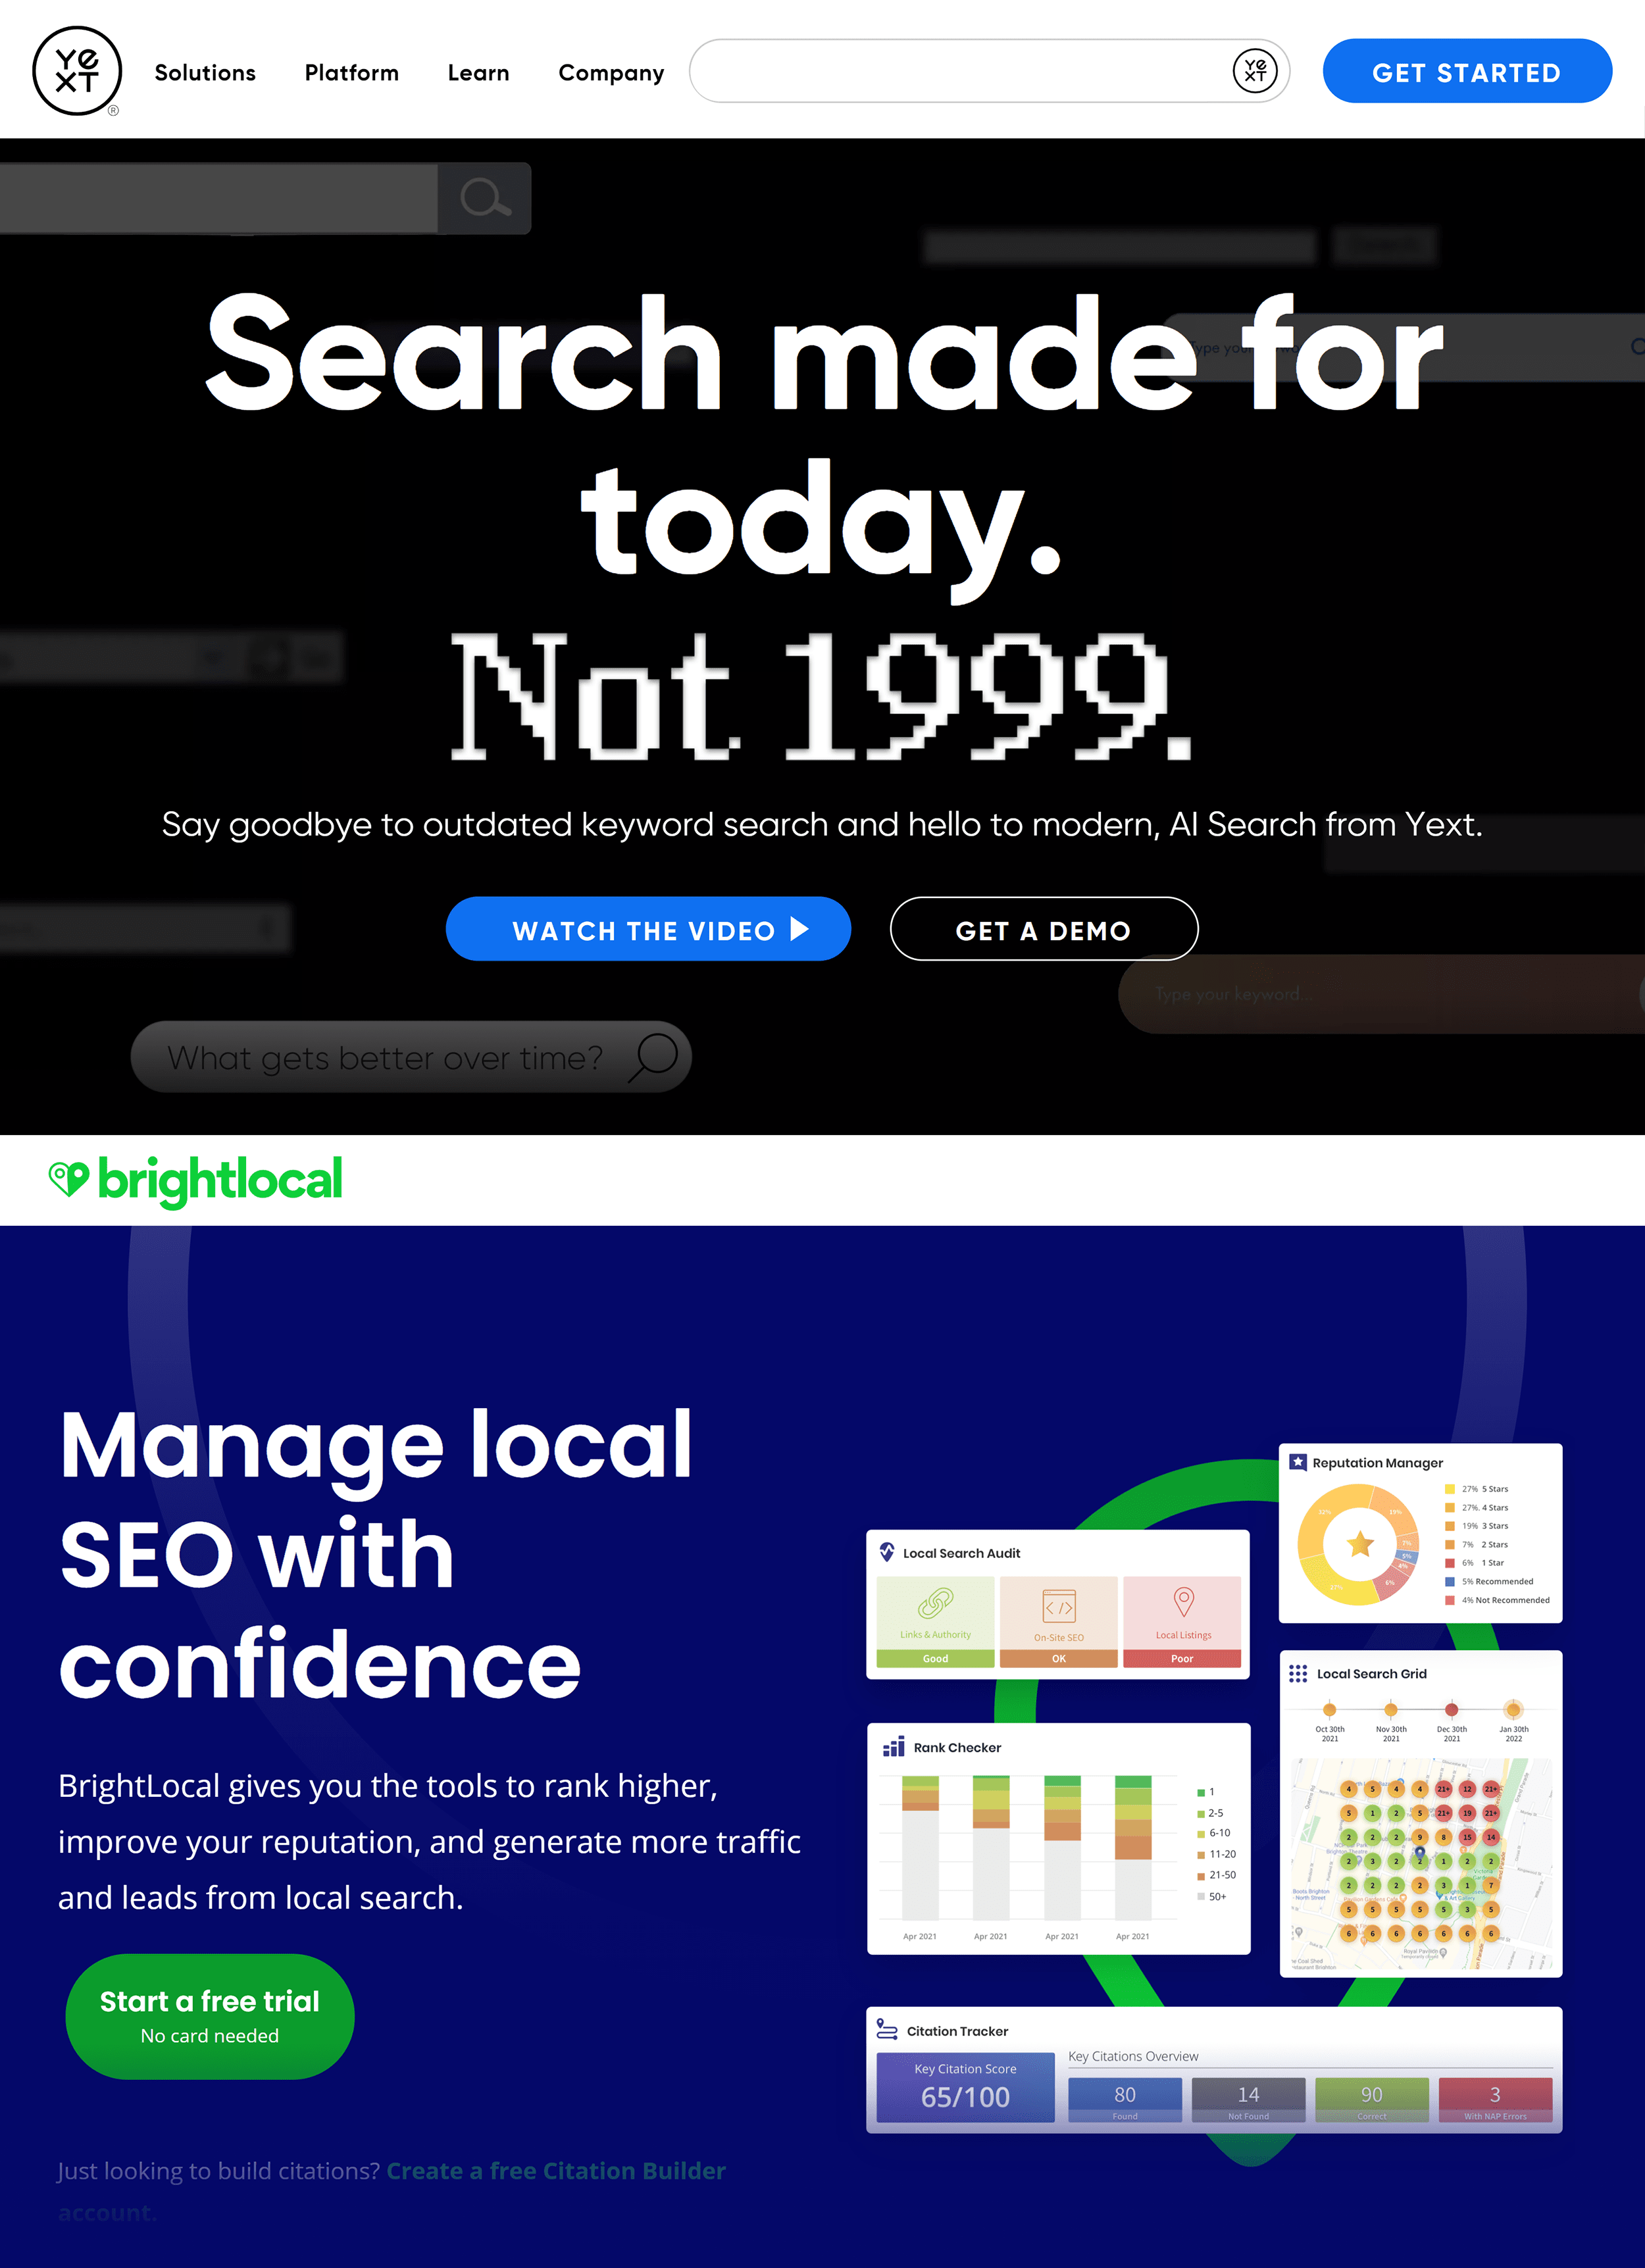 Yext and Brightlocal